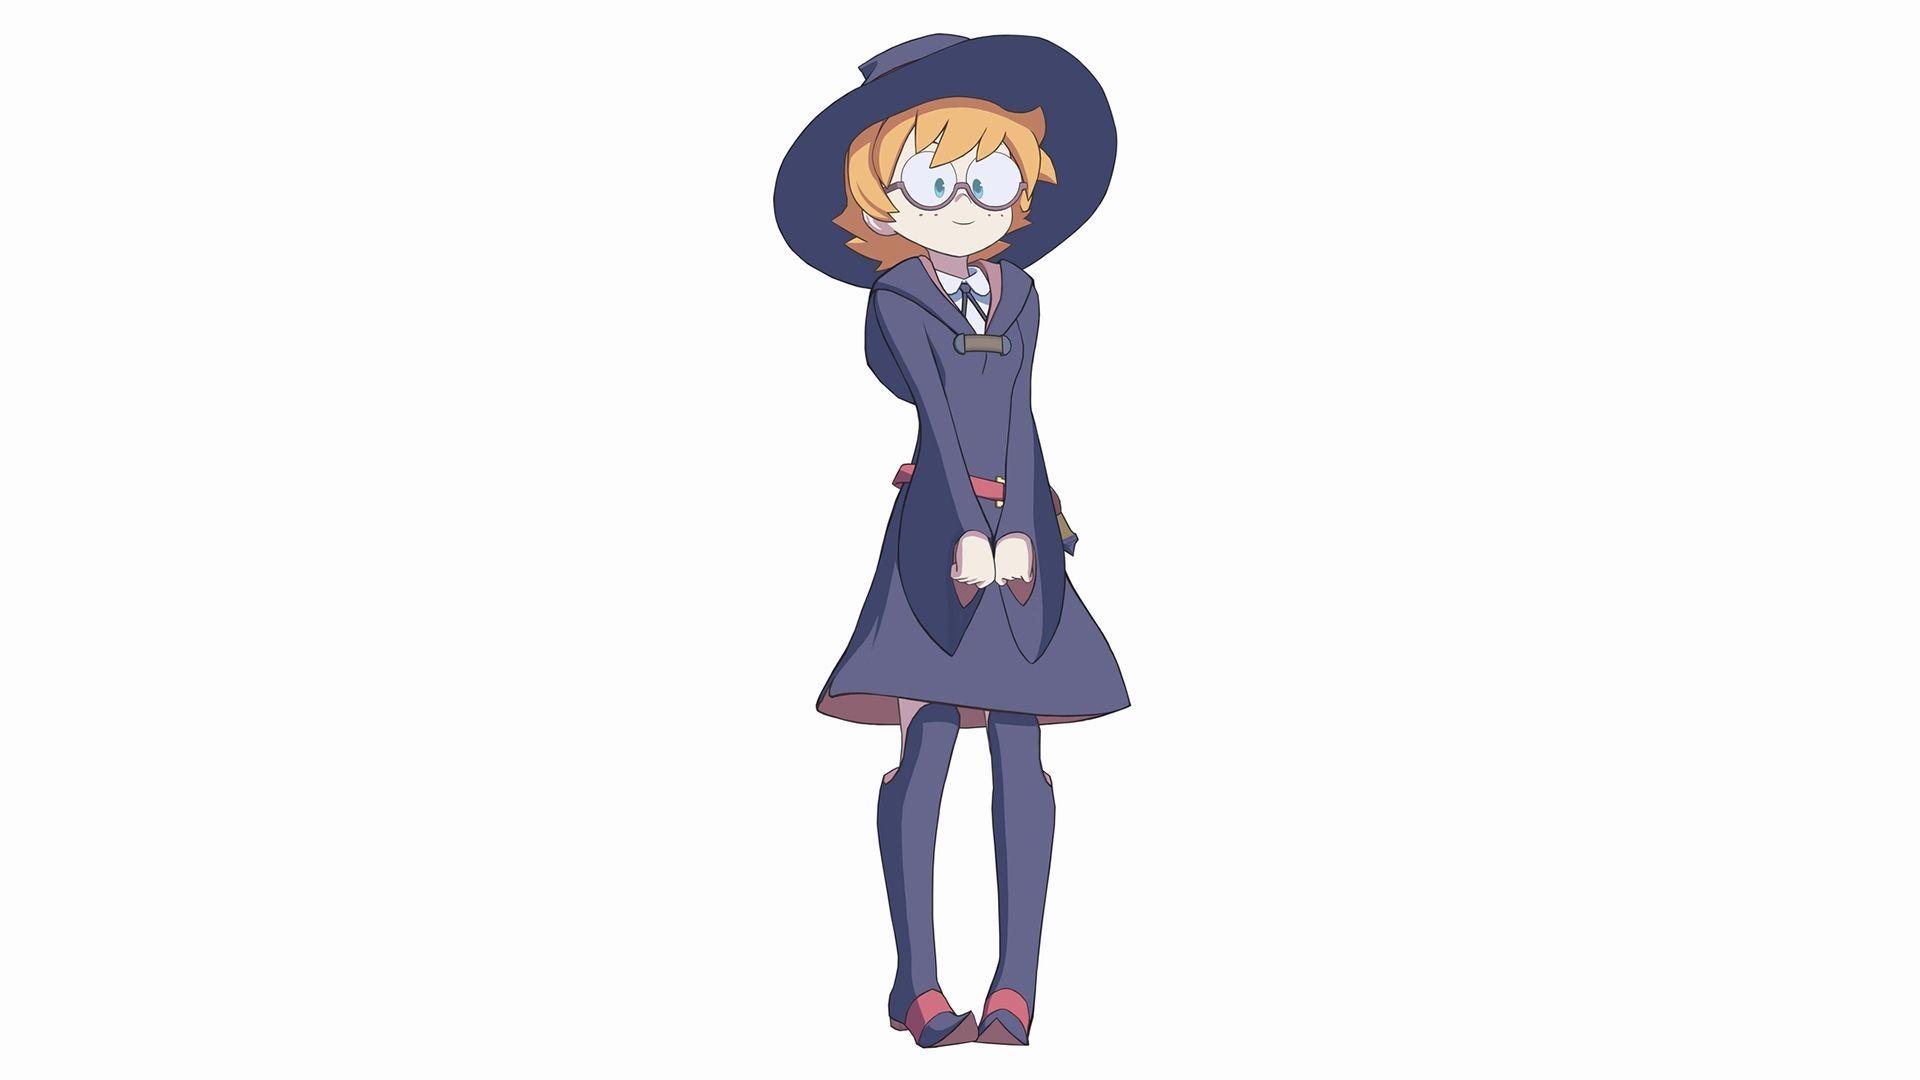 Lotte Little Witch Academia: Chamber of Time. Ideas for novel